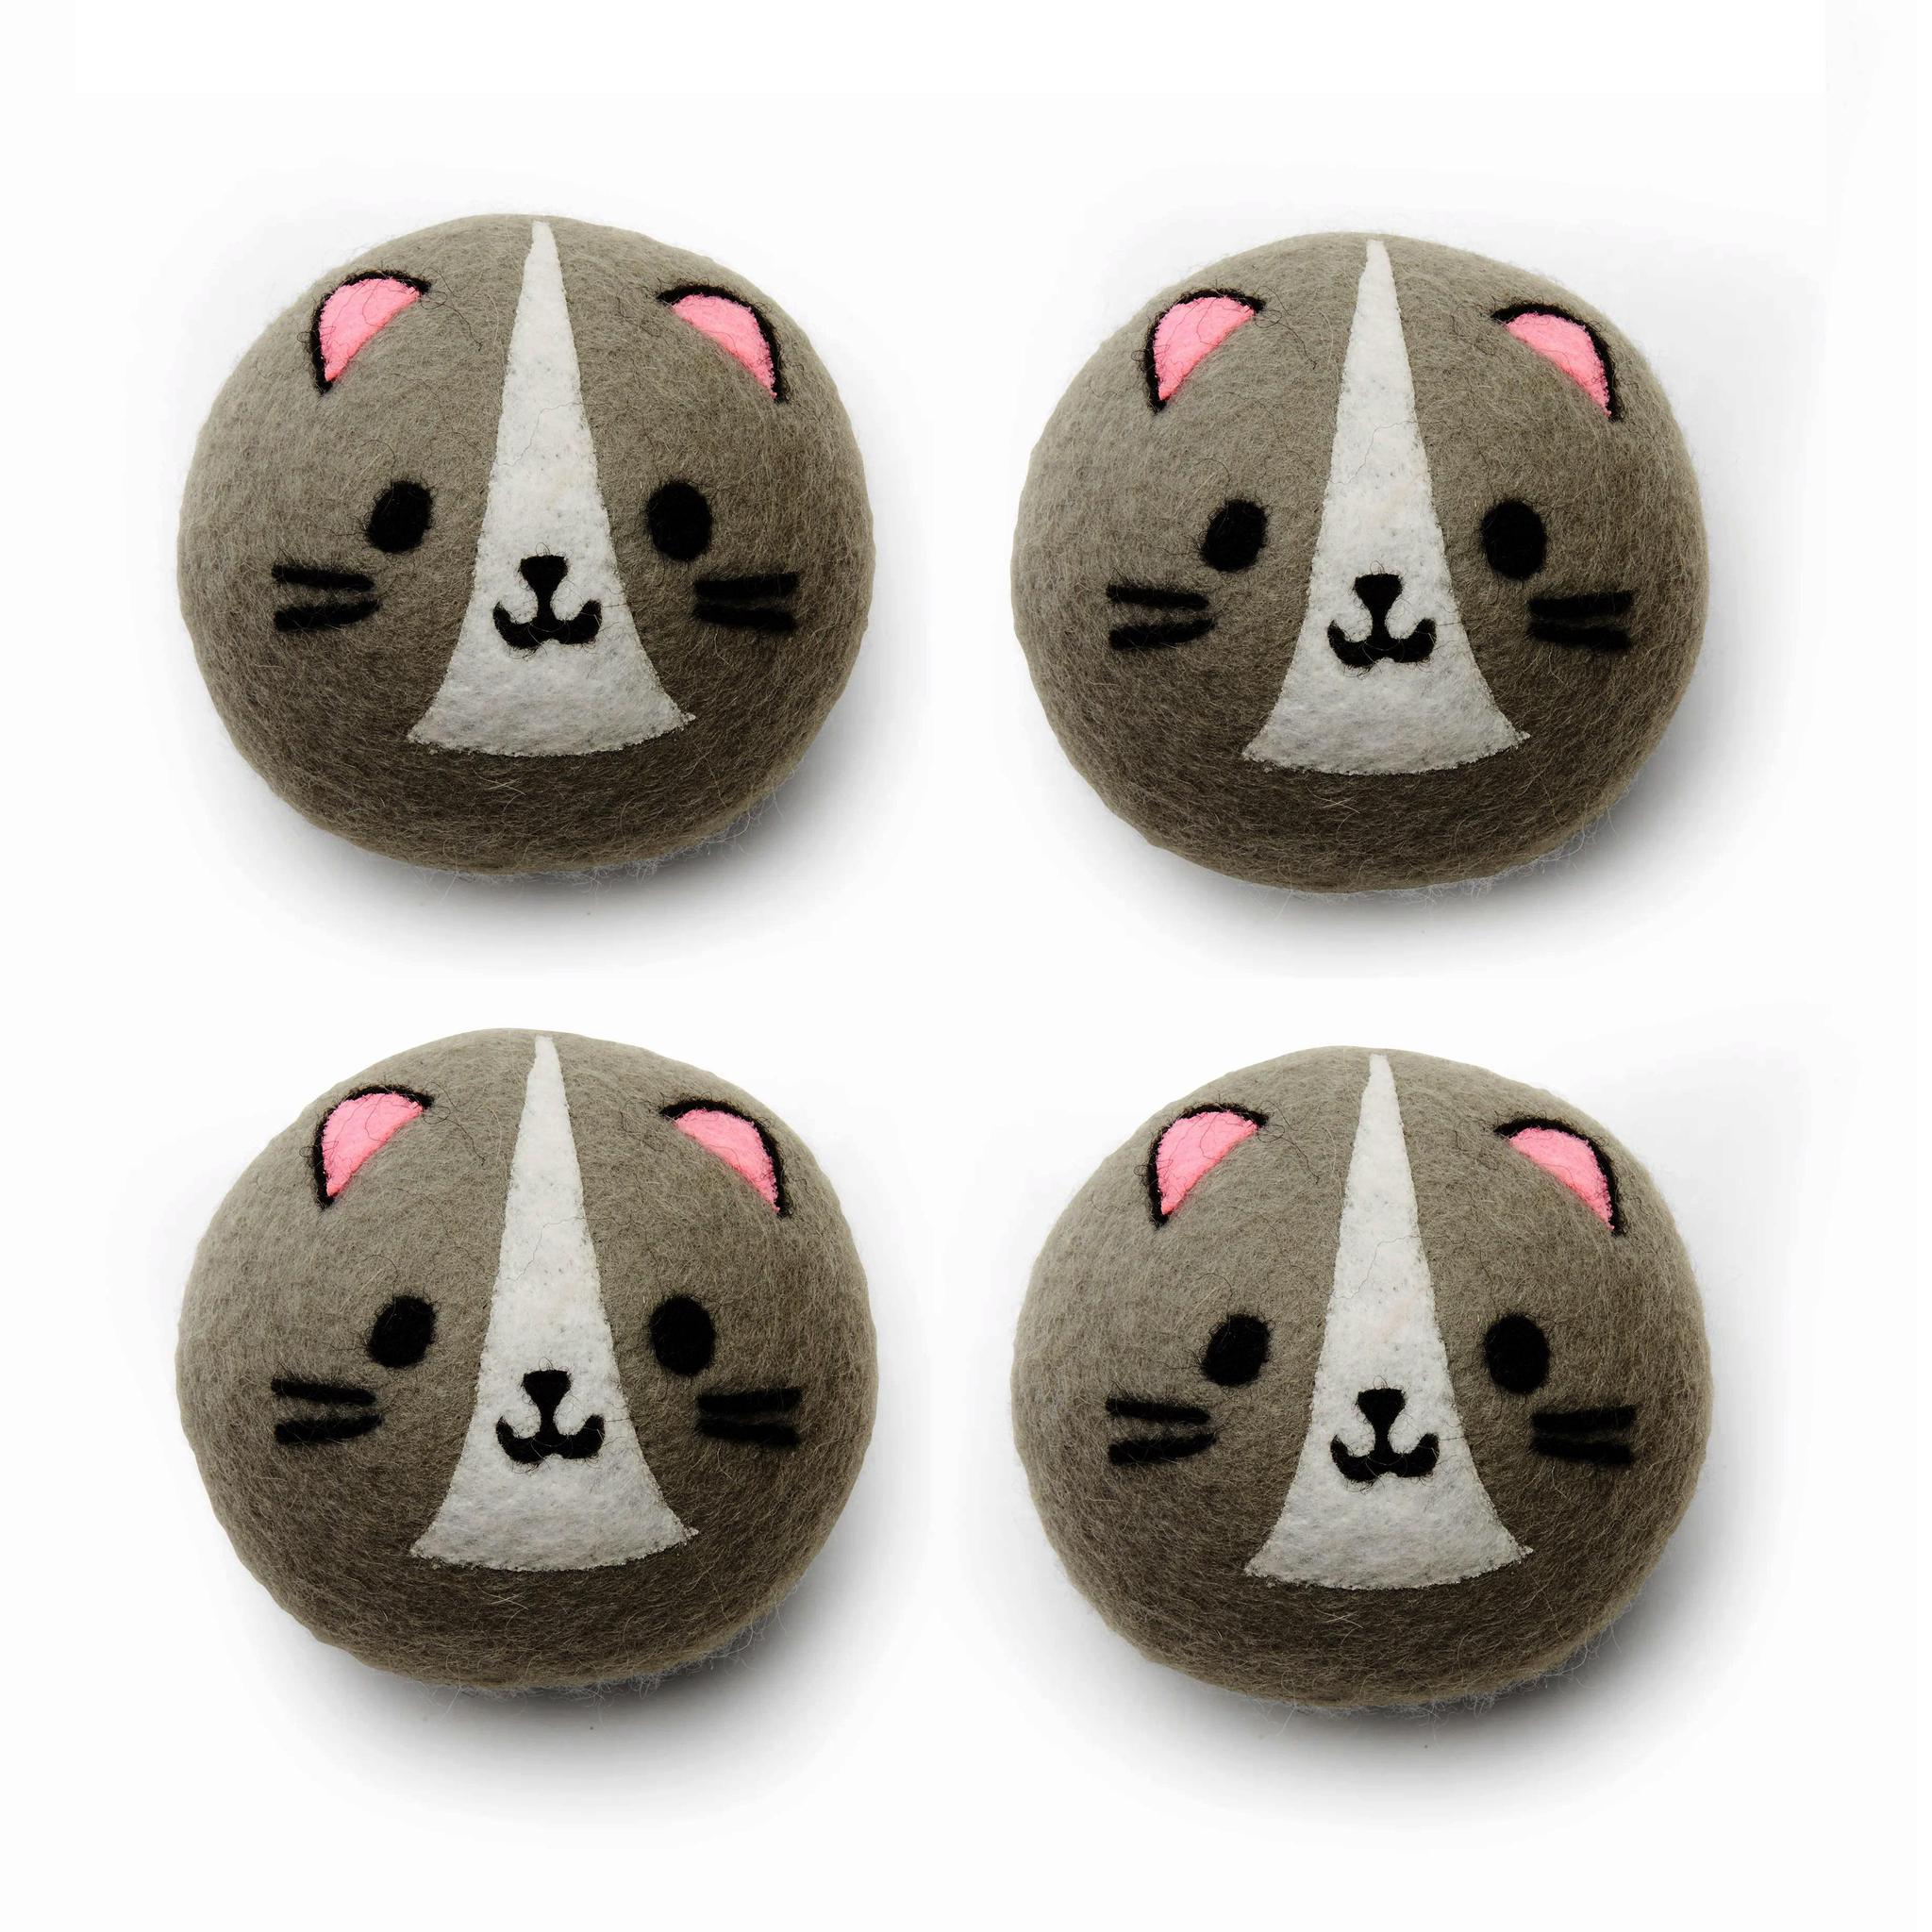 Cat Dryer Buddies 4 Wool Laundry Balls for Eco-Friendly